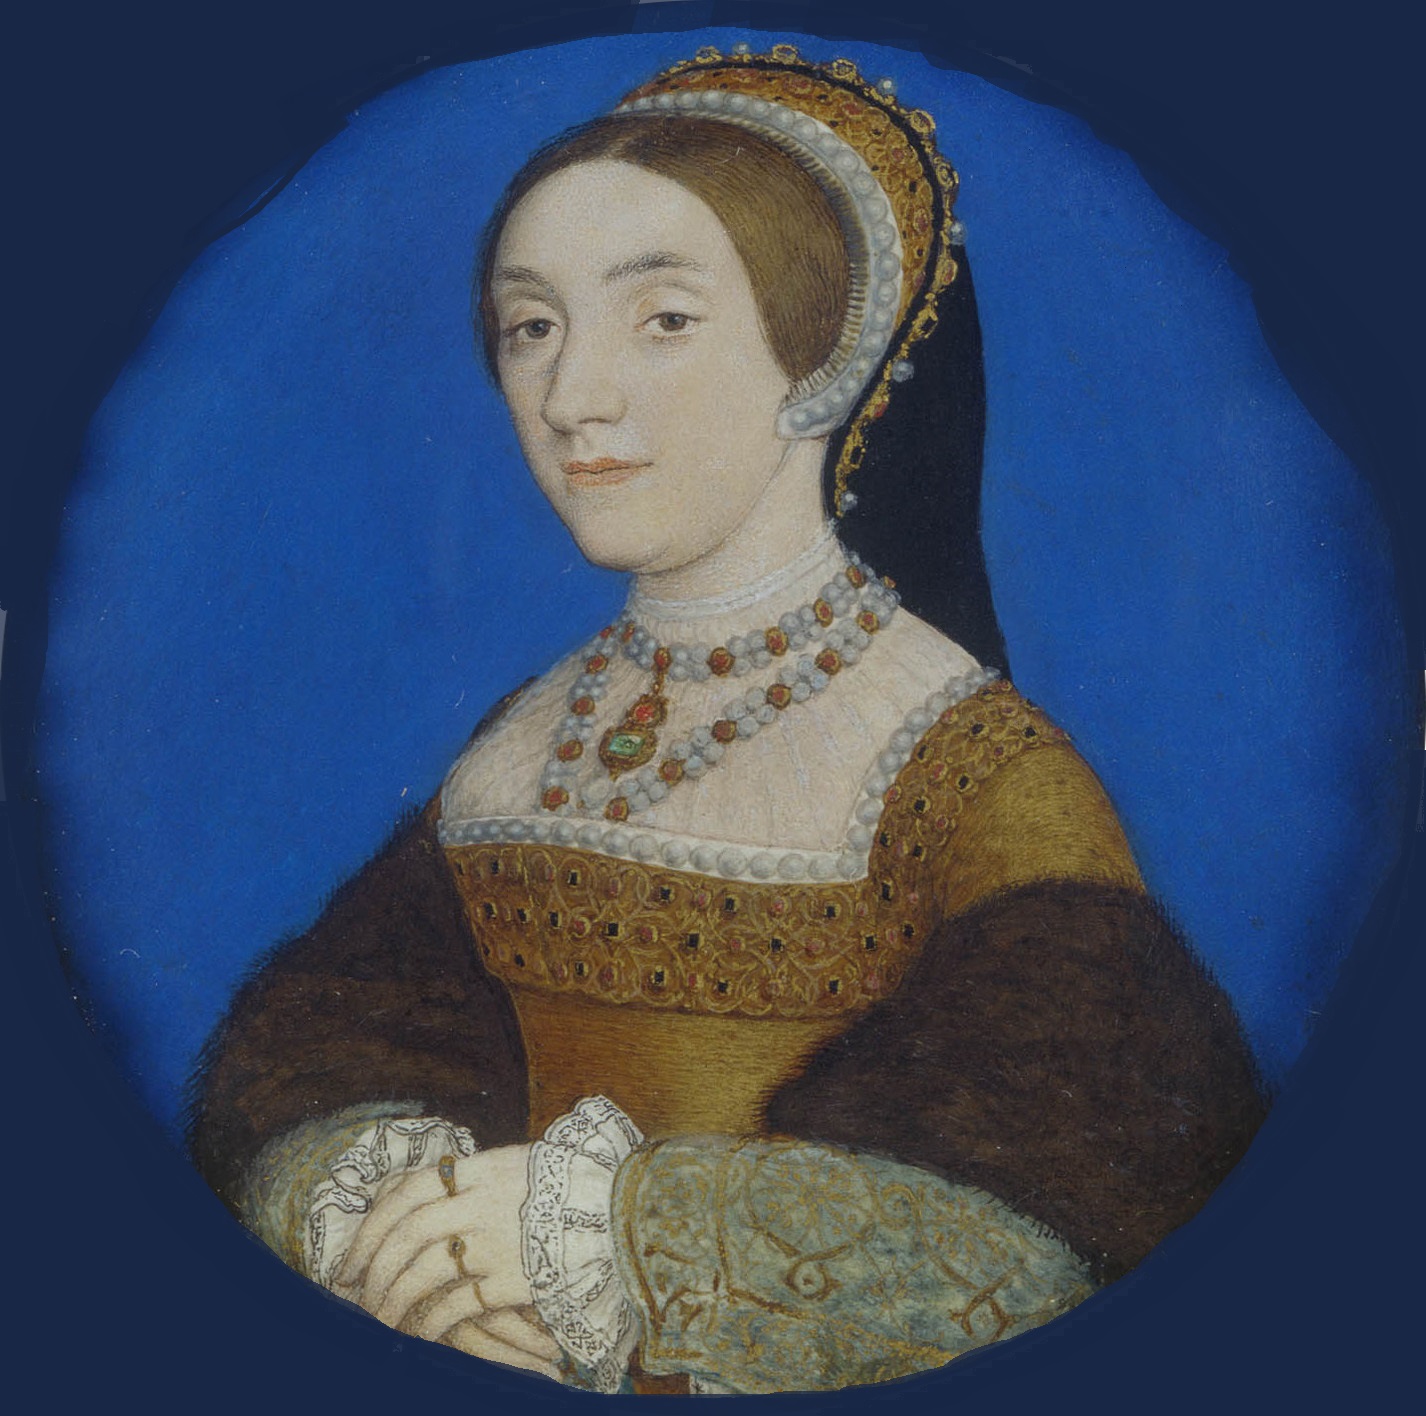 Catherine Howard -Portrait by Hans Holbein the Younger circa 1540